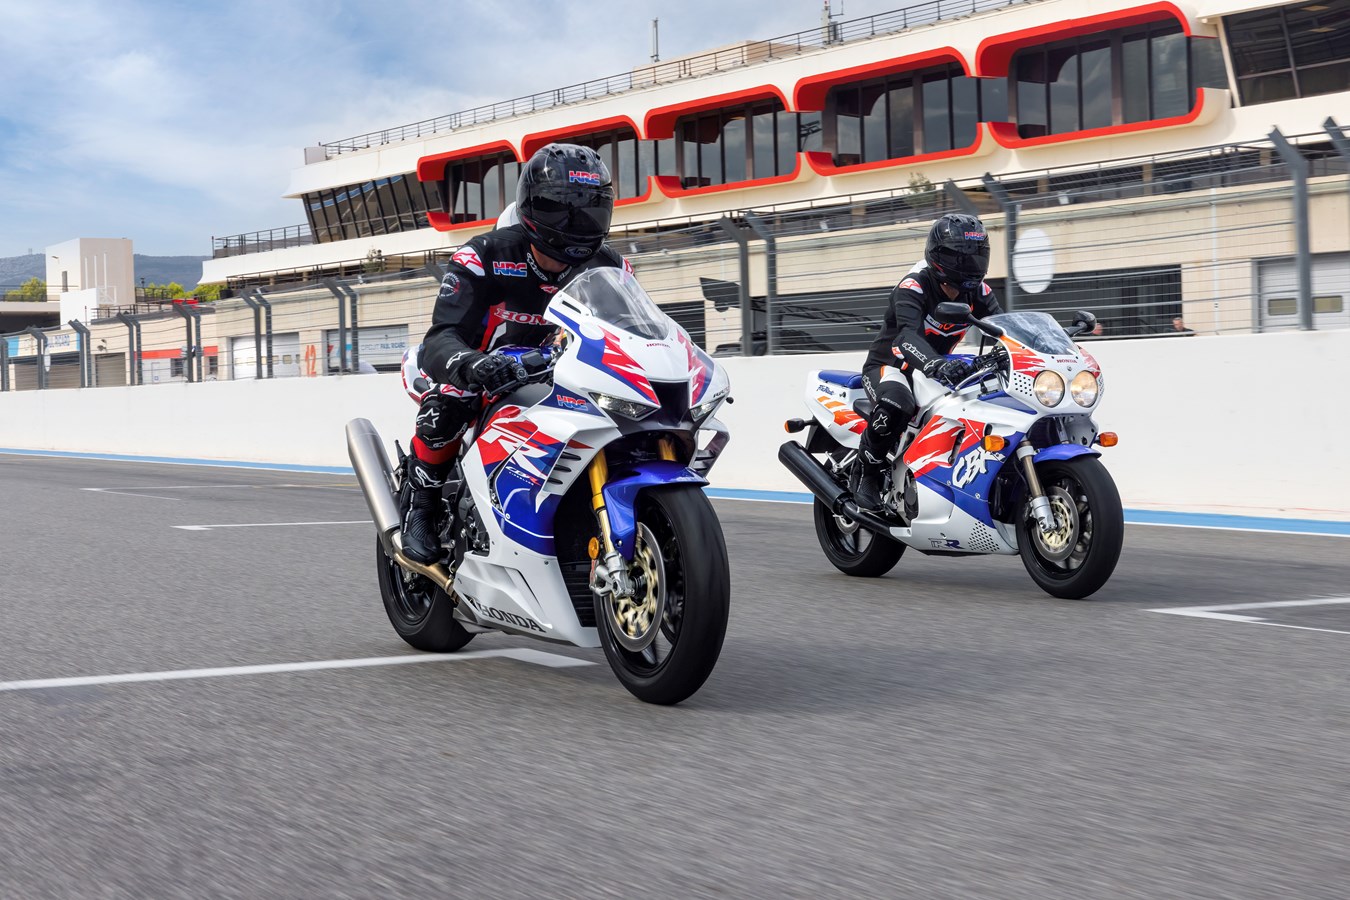 Fresh from a stunning Bennetts British Superbikes treble win at Silverstone, Honda announce plans to celebrate 30 years of the Fireblade at Round 3 at Donington Park